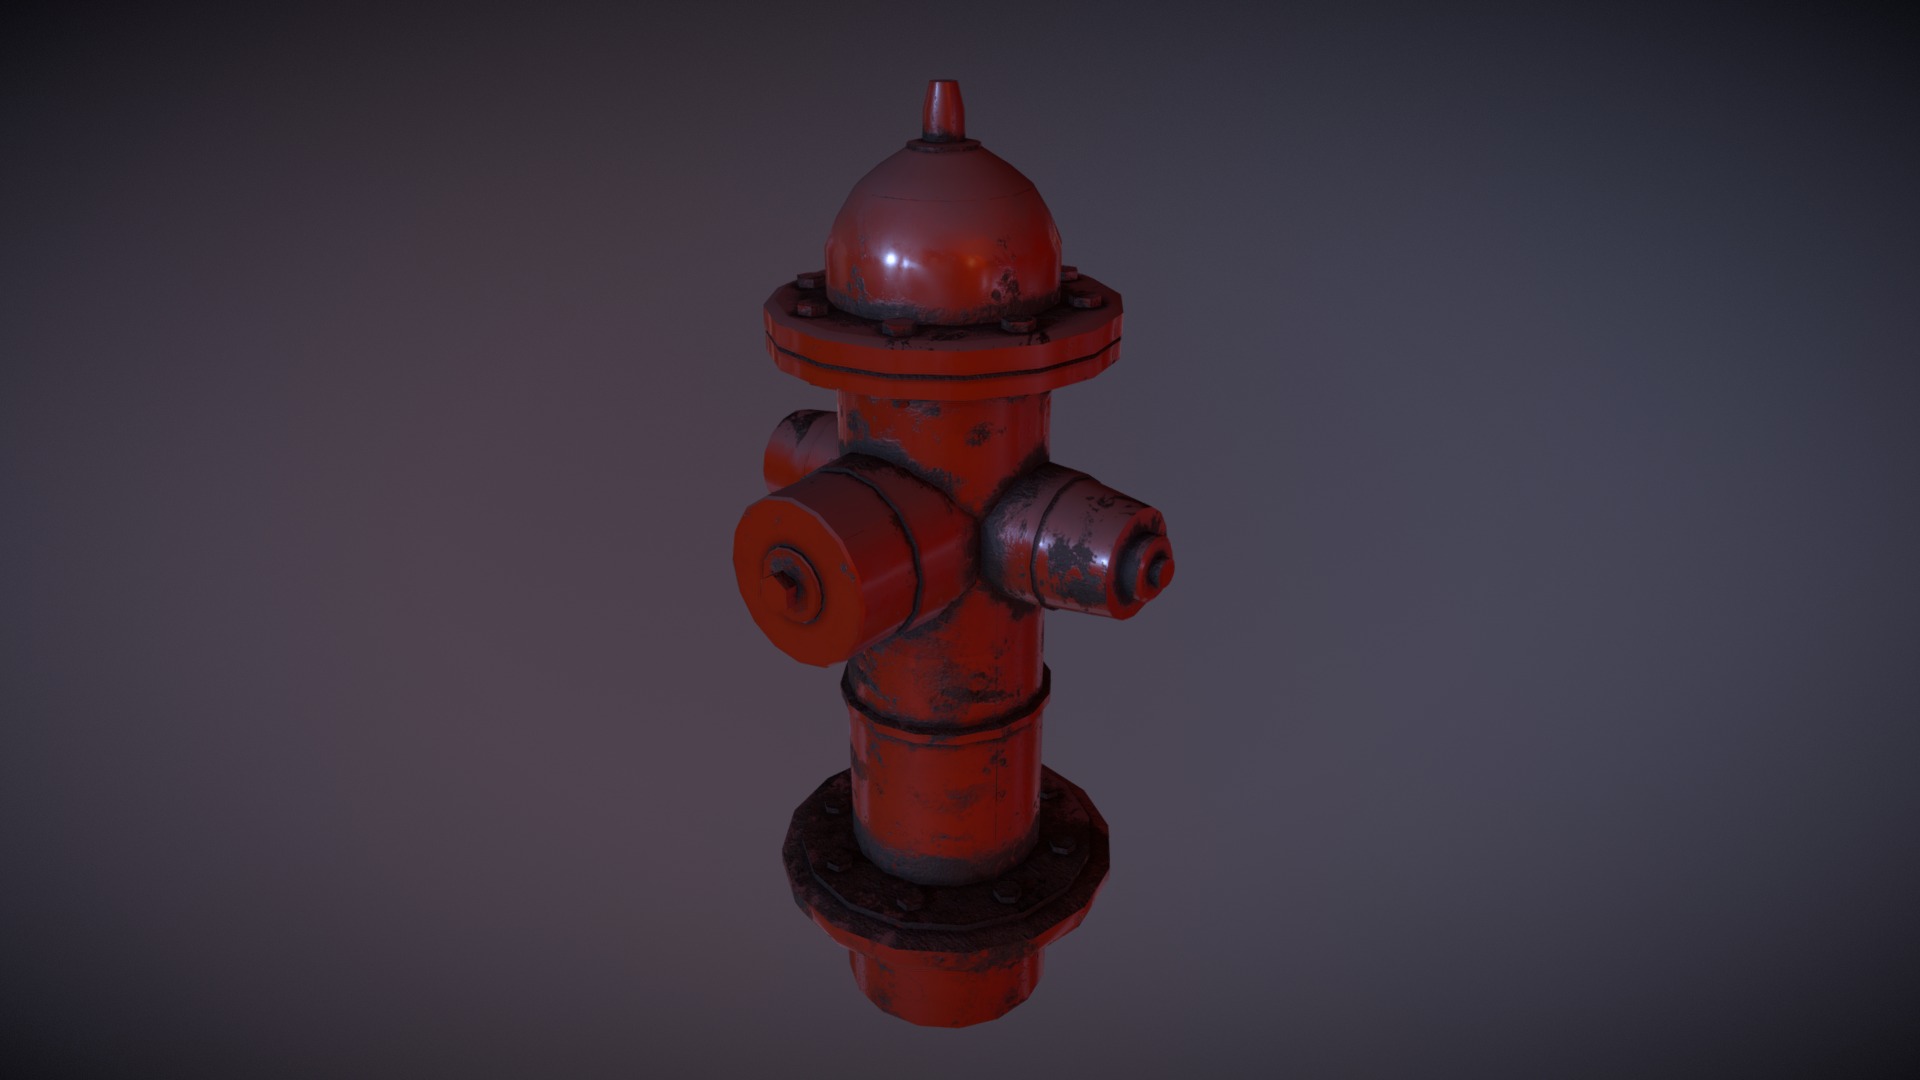 3D model Game Ready Fire Hydrant Low Poly - This is a 3D model of the Game Ready Fire Hydrant Low Poly. The 3D model is about a small orange fire hydrant.